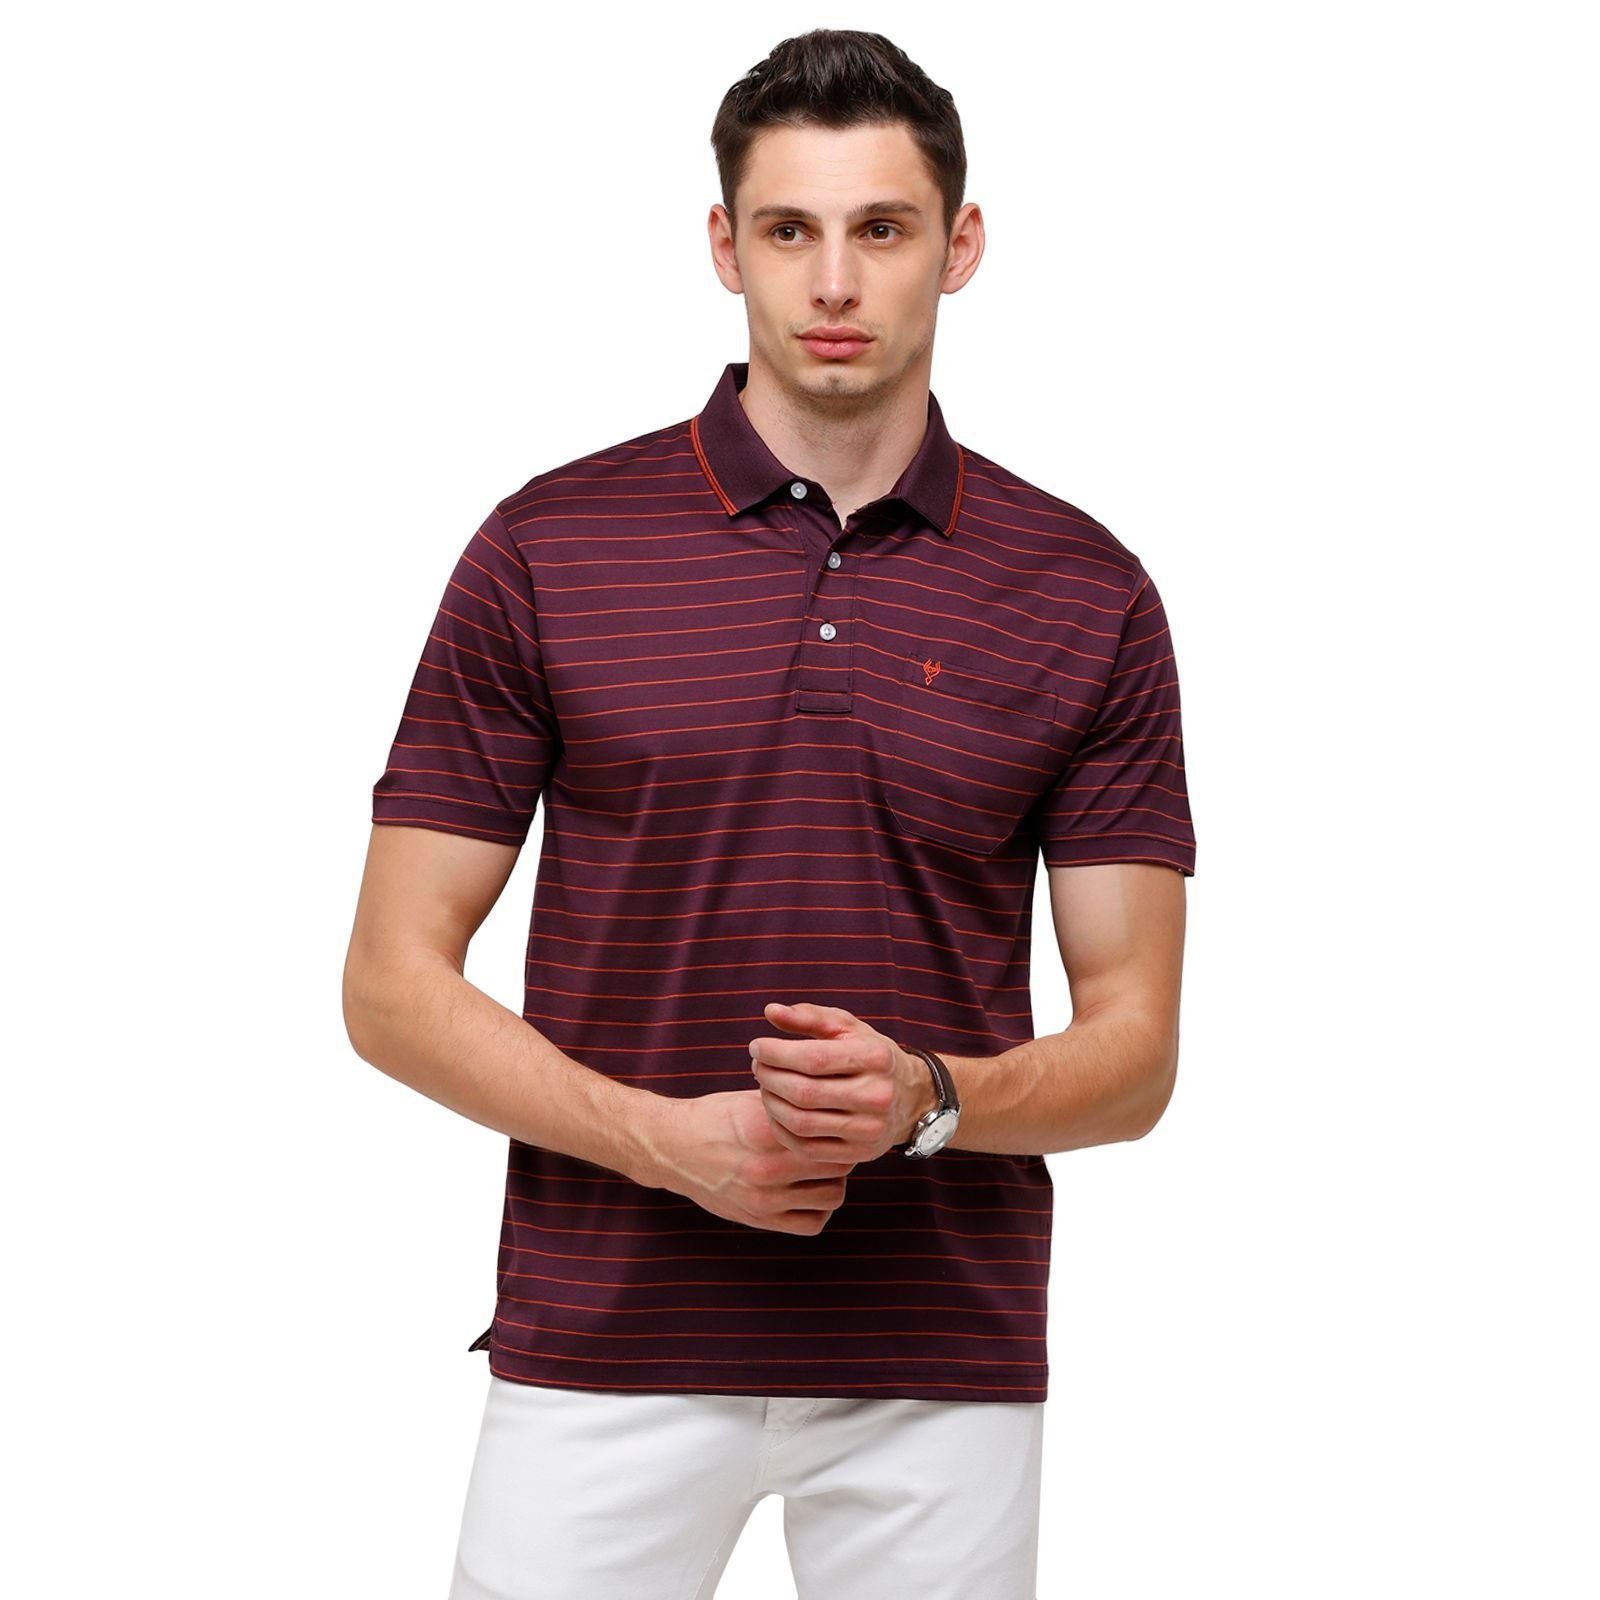 Classic Polo Men's Striped Authentic Fit Half Sleeve Premium Maroon Stripe T-Shirt - Ultimo - 257 A T-Shirt Classic Polo 